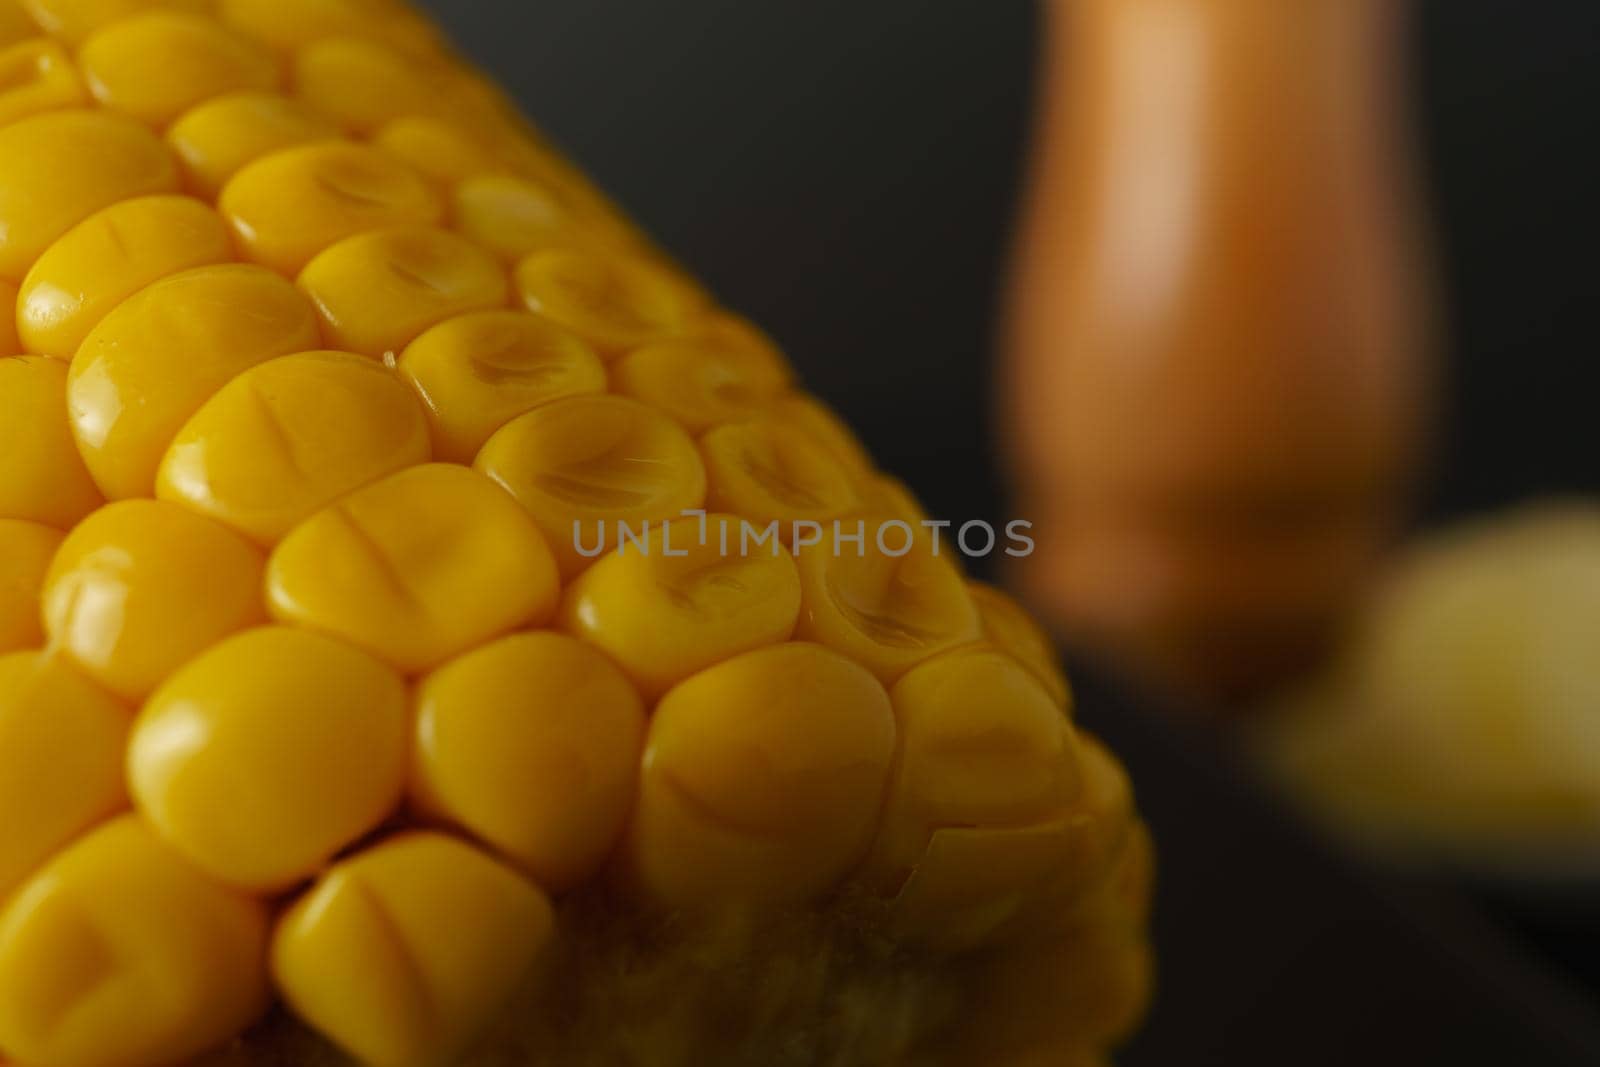 macro close-up of an ear of corn with an out-of-focus pepper pot in the background by joseantona